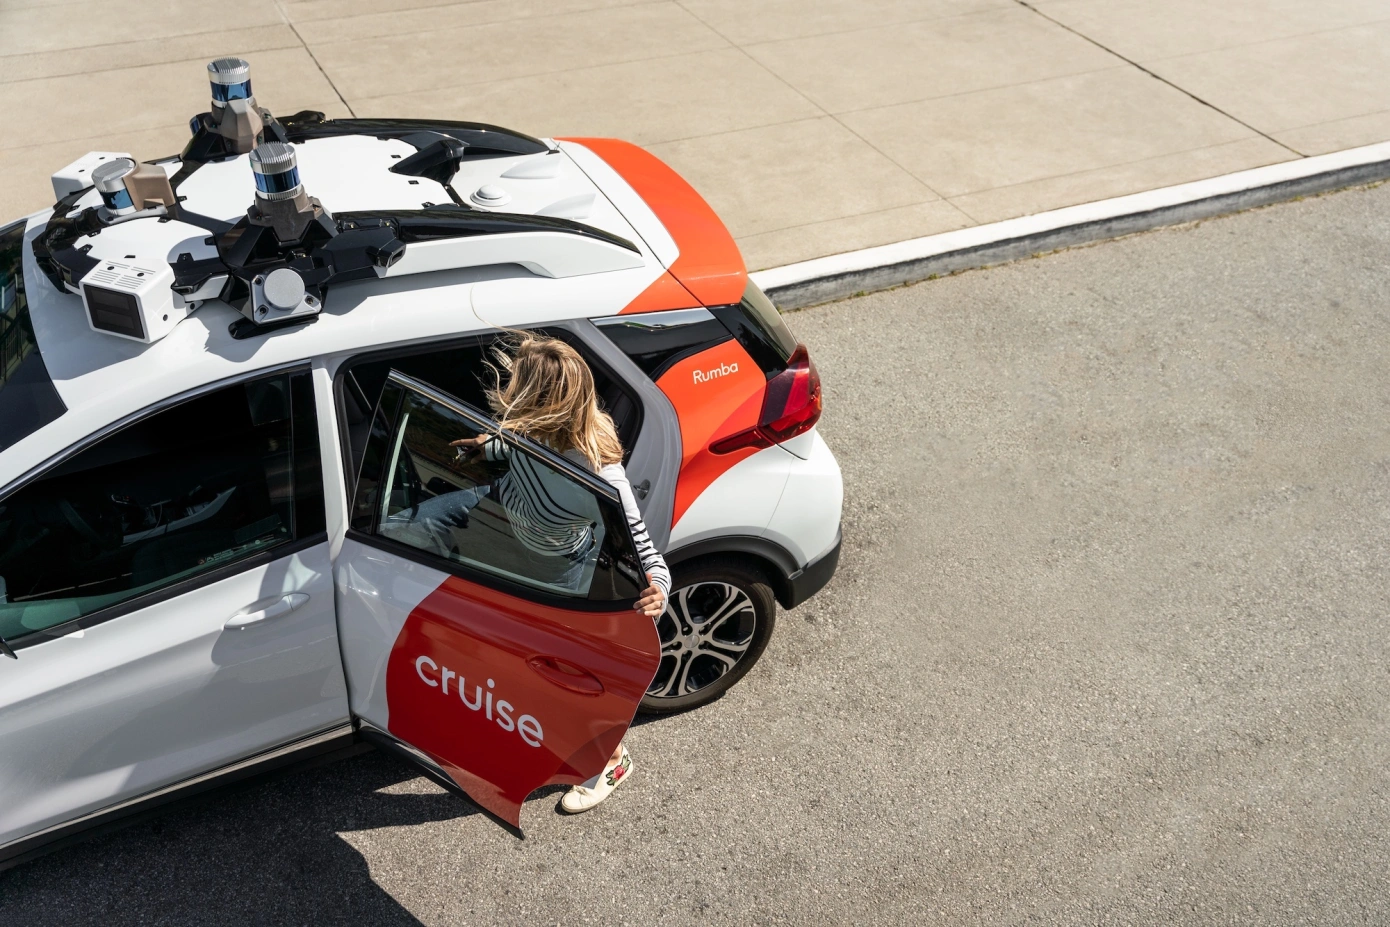 Cruise and Waymo have called humans bad drivers and urged faster adoption of robot taxis